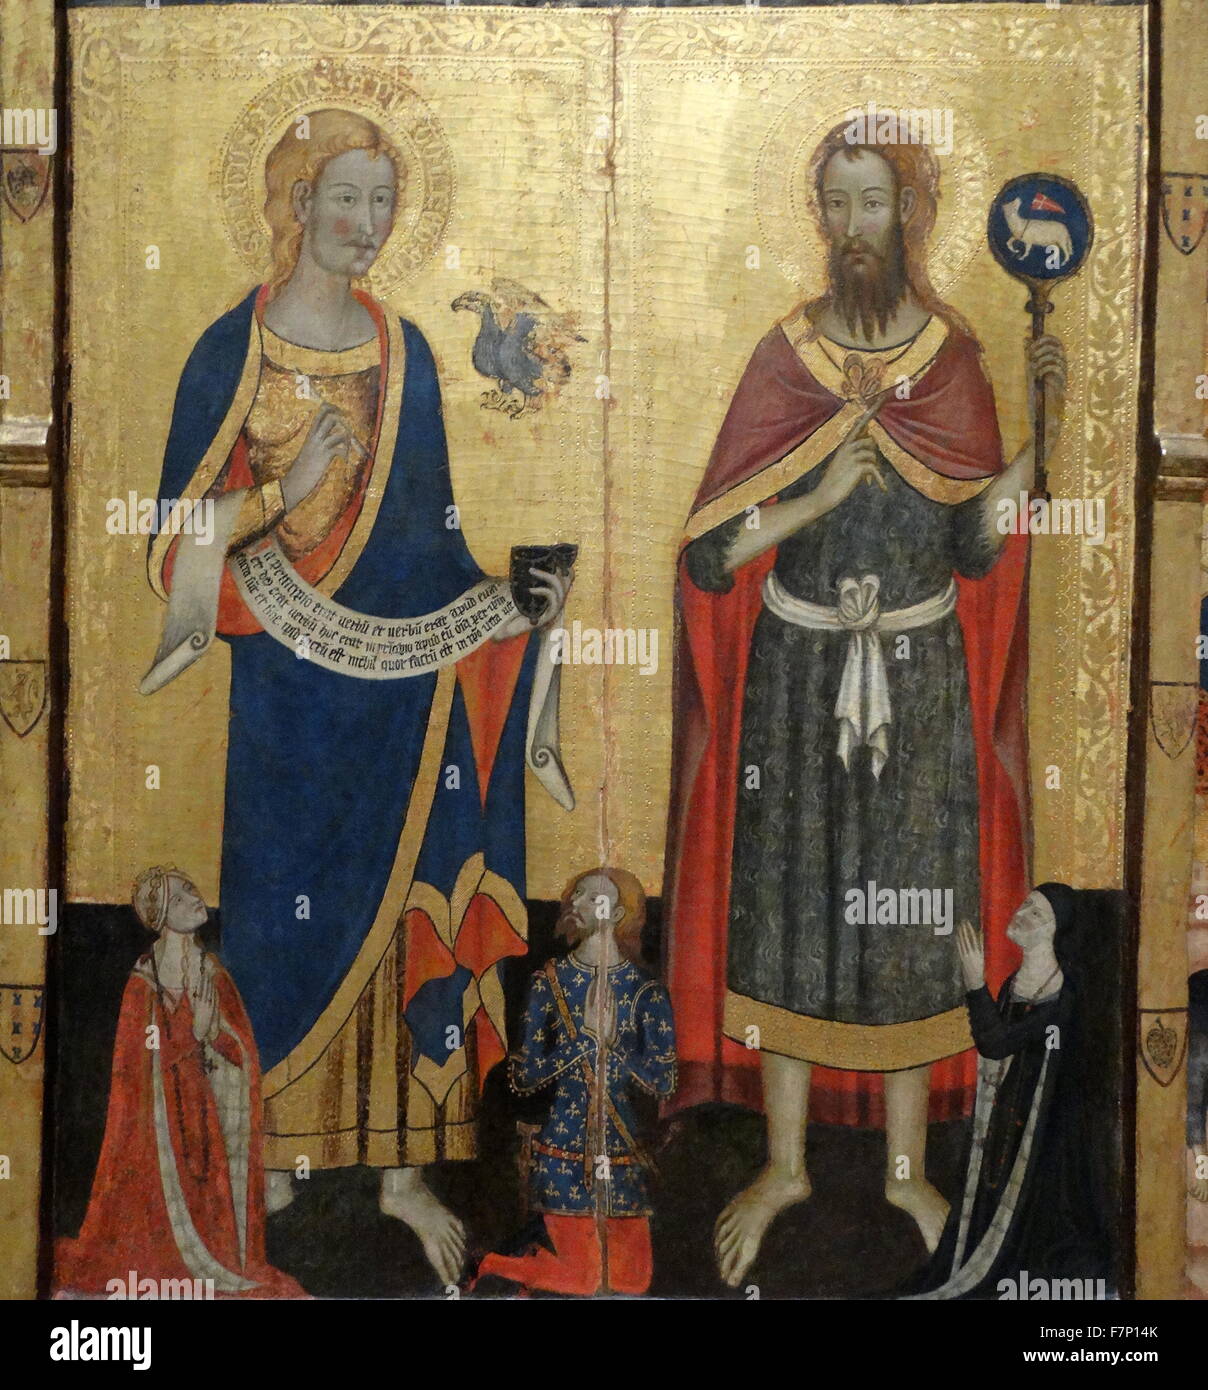 Altarpiece of the Saints John by Master of Santa Coloma de Queralt. Dated 14th Century Stock Photo